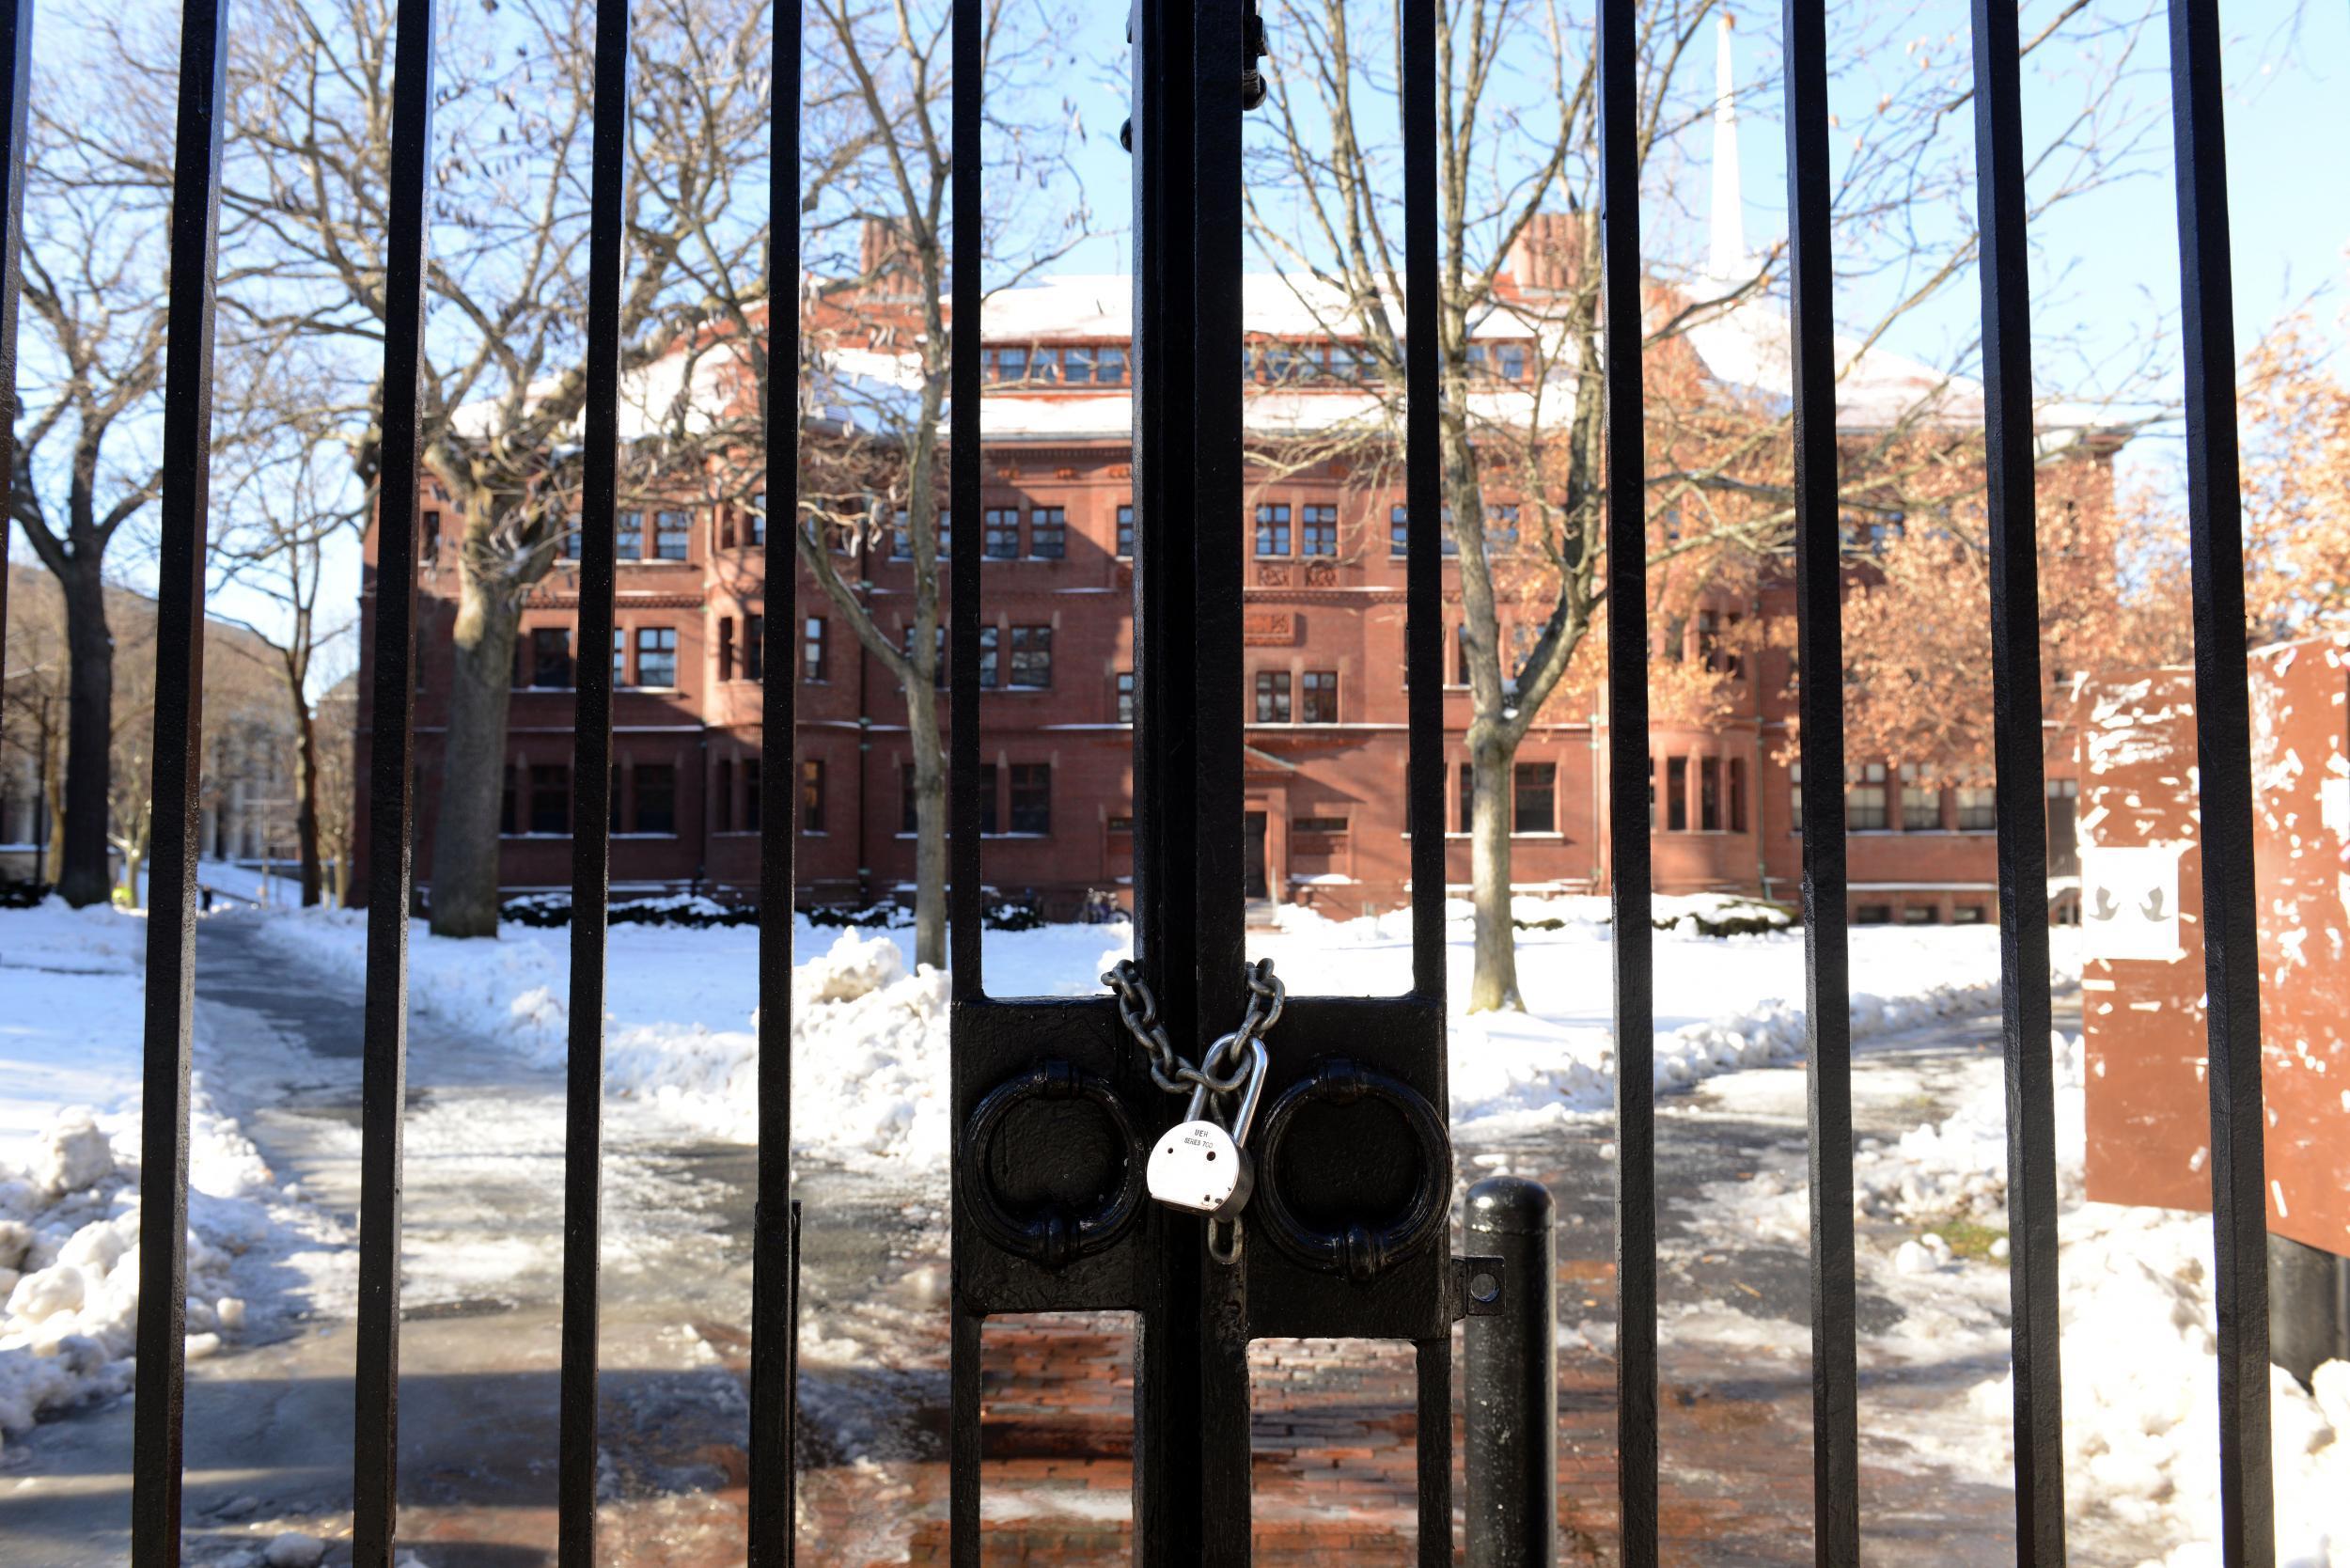 At least 10 prospective students have reportedly had their admissions rescinded from Harvard University